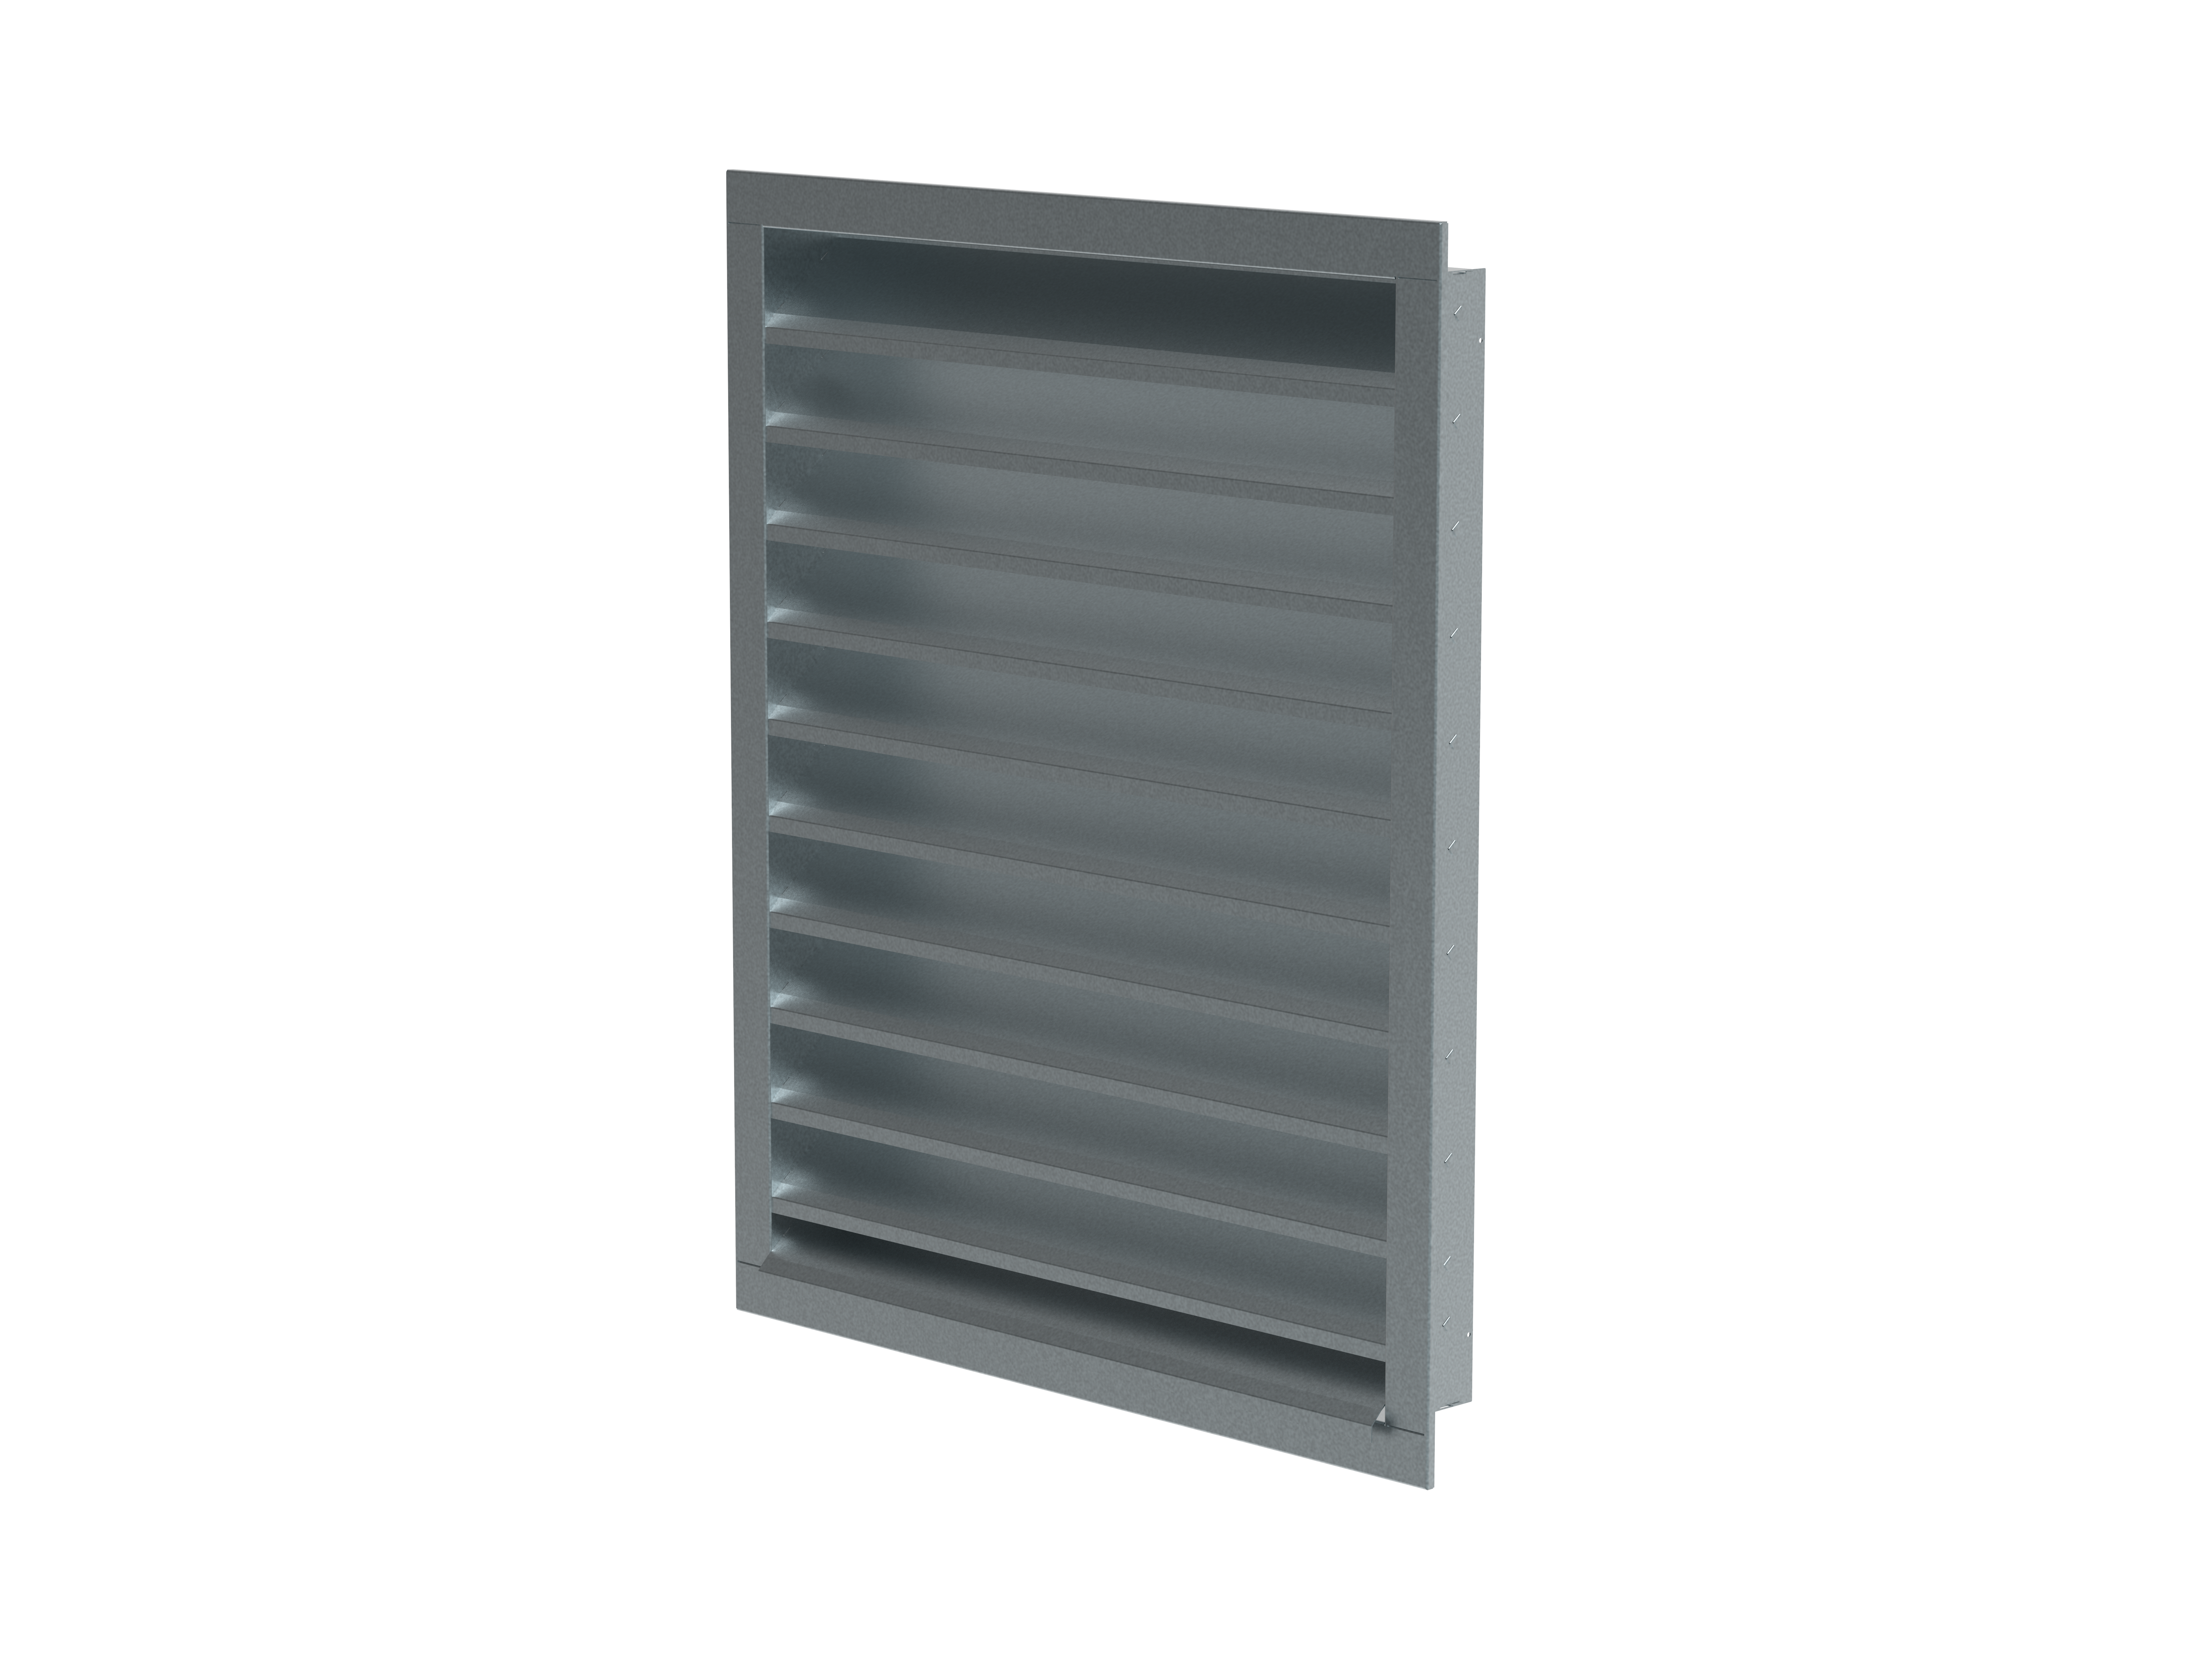 PZZNS - Louvres - Air Distribution Products - Məhsullar - Systemair